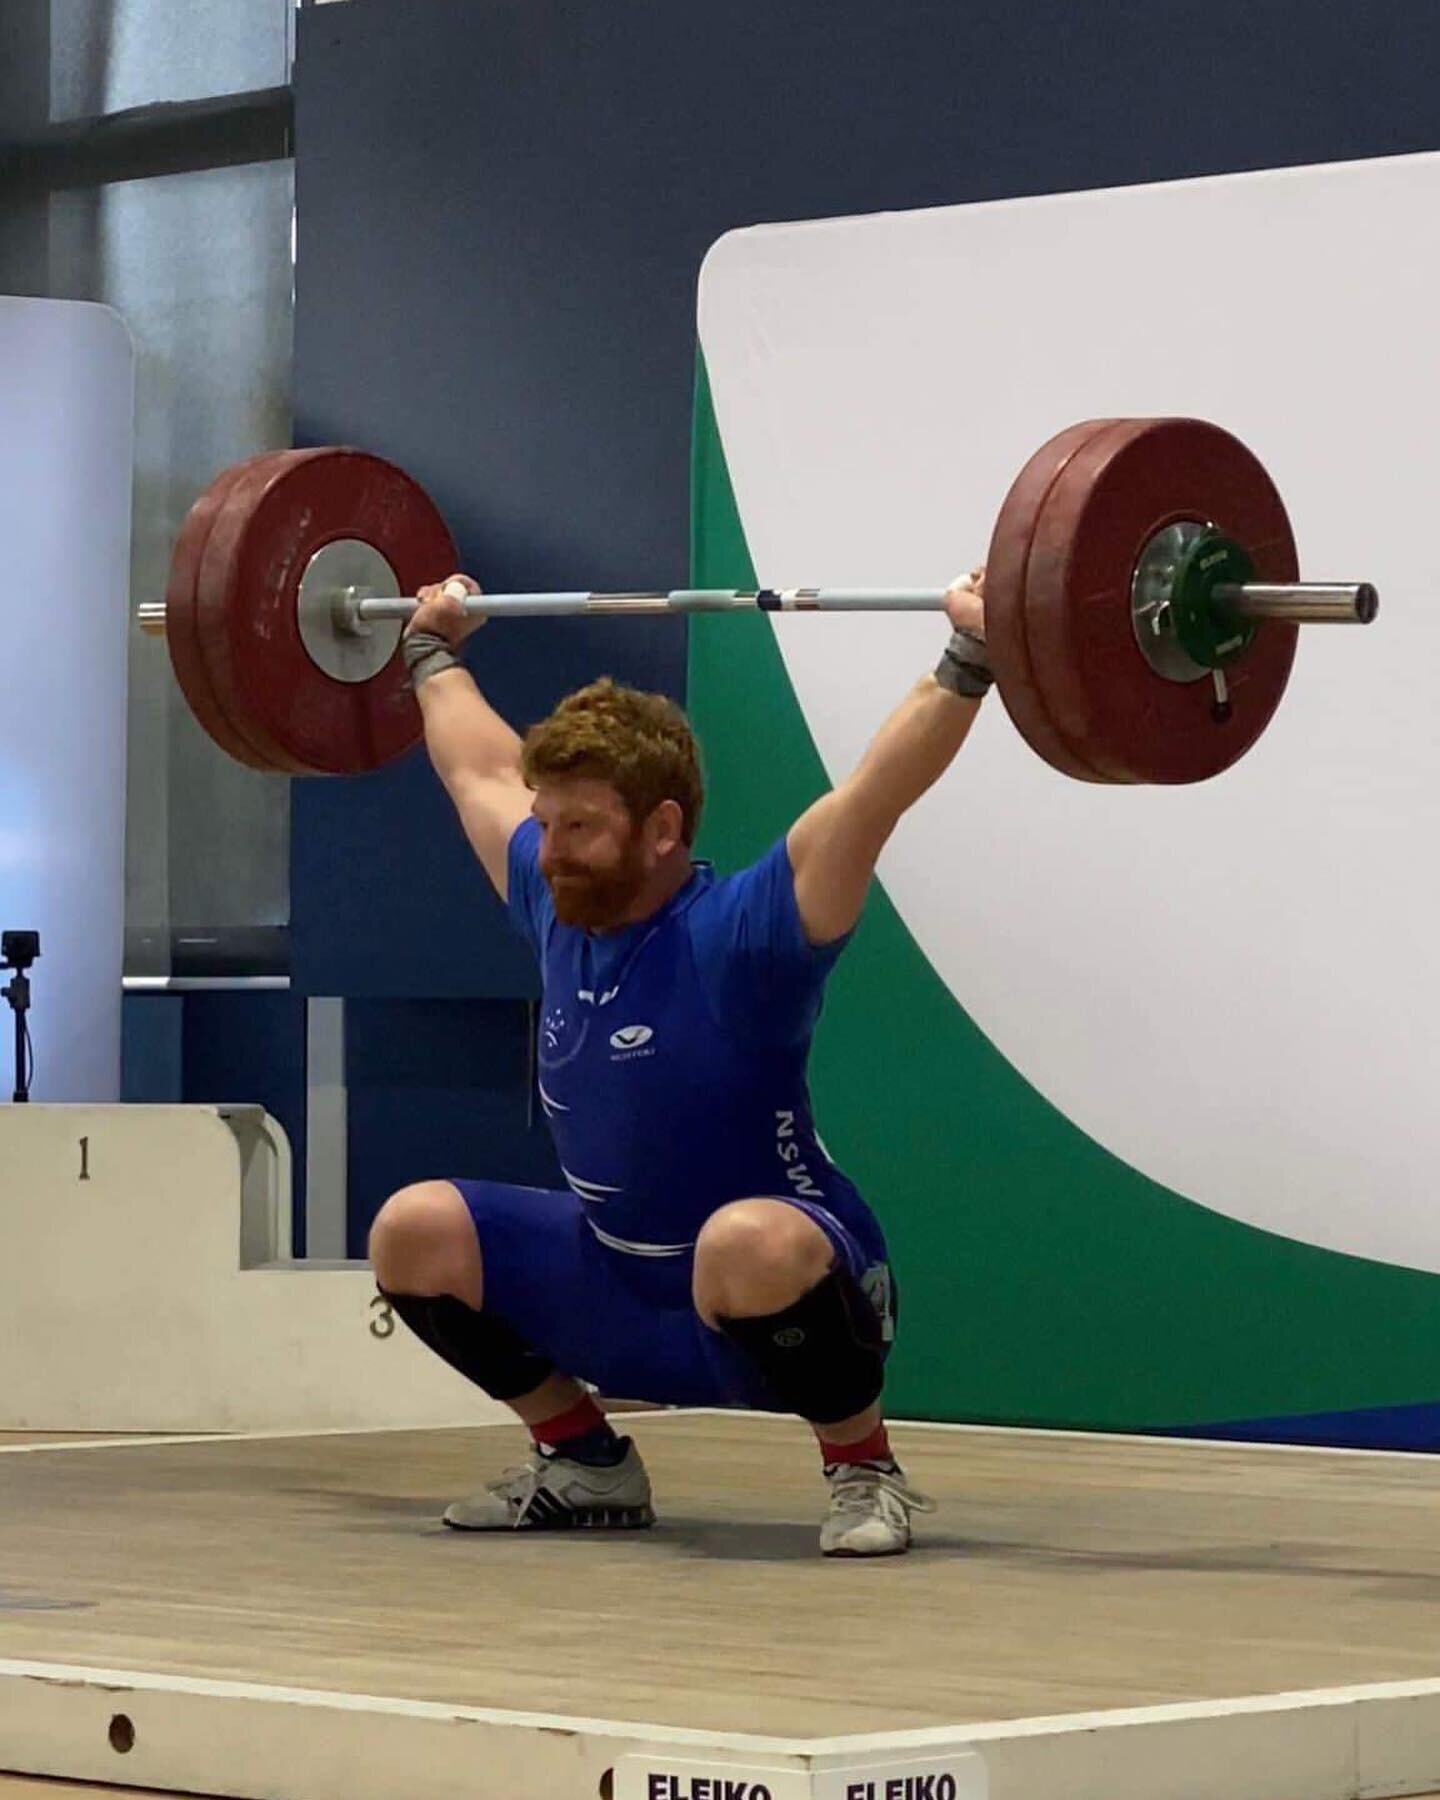 We are a bit late on this post but congratulations to our lifting guru @adrianredcarey who placed 3rd at Nationals with 127/162/289.

This was Red&rsquo;s 4th Nationals appearance. 

Congratulations from your admirers at CrossFit Dubbo and @dubbobarb